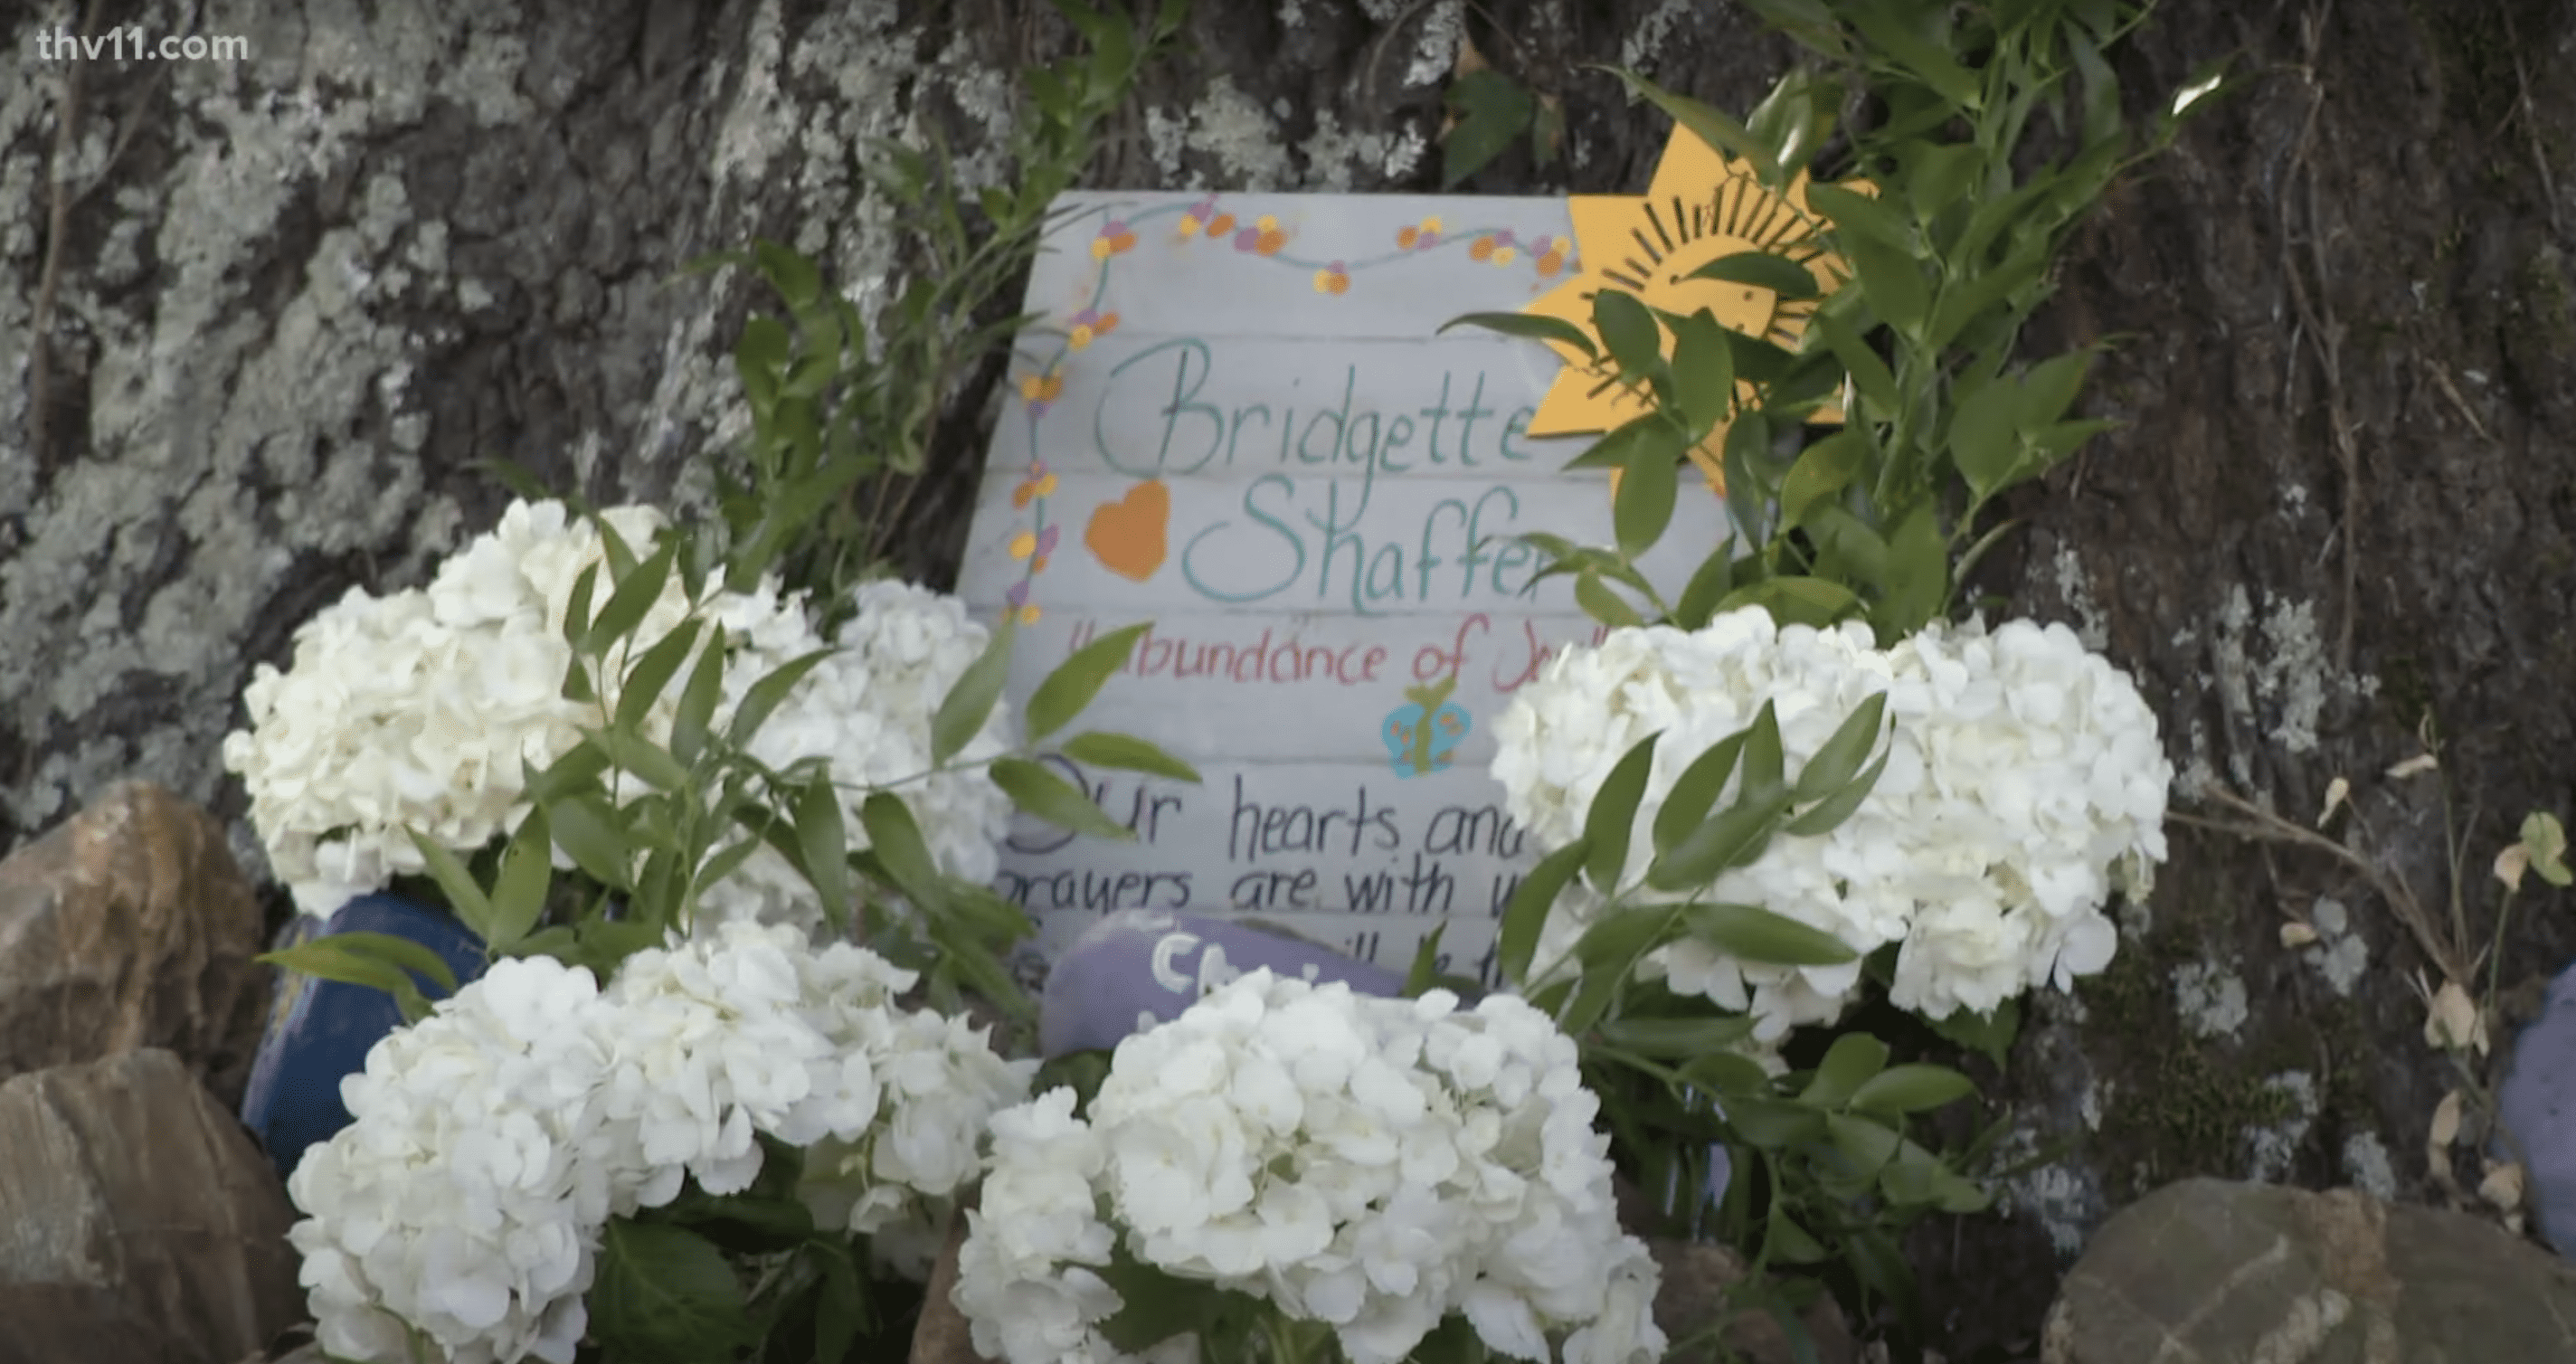 White flowers are placed in remembrance of little Bridgette. | Source: YouTube.com/THV11